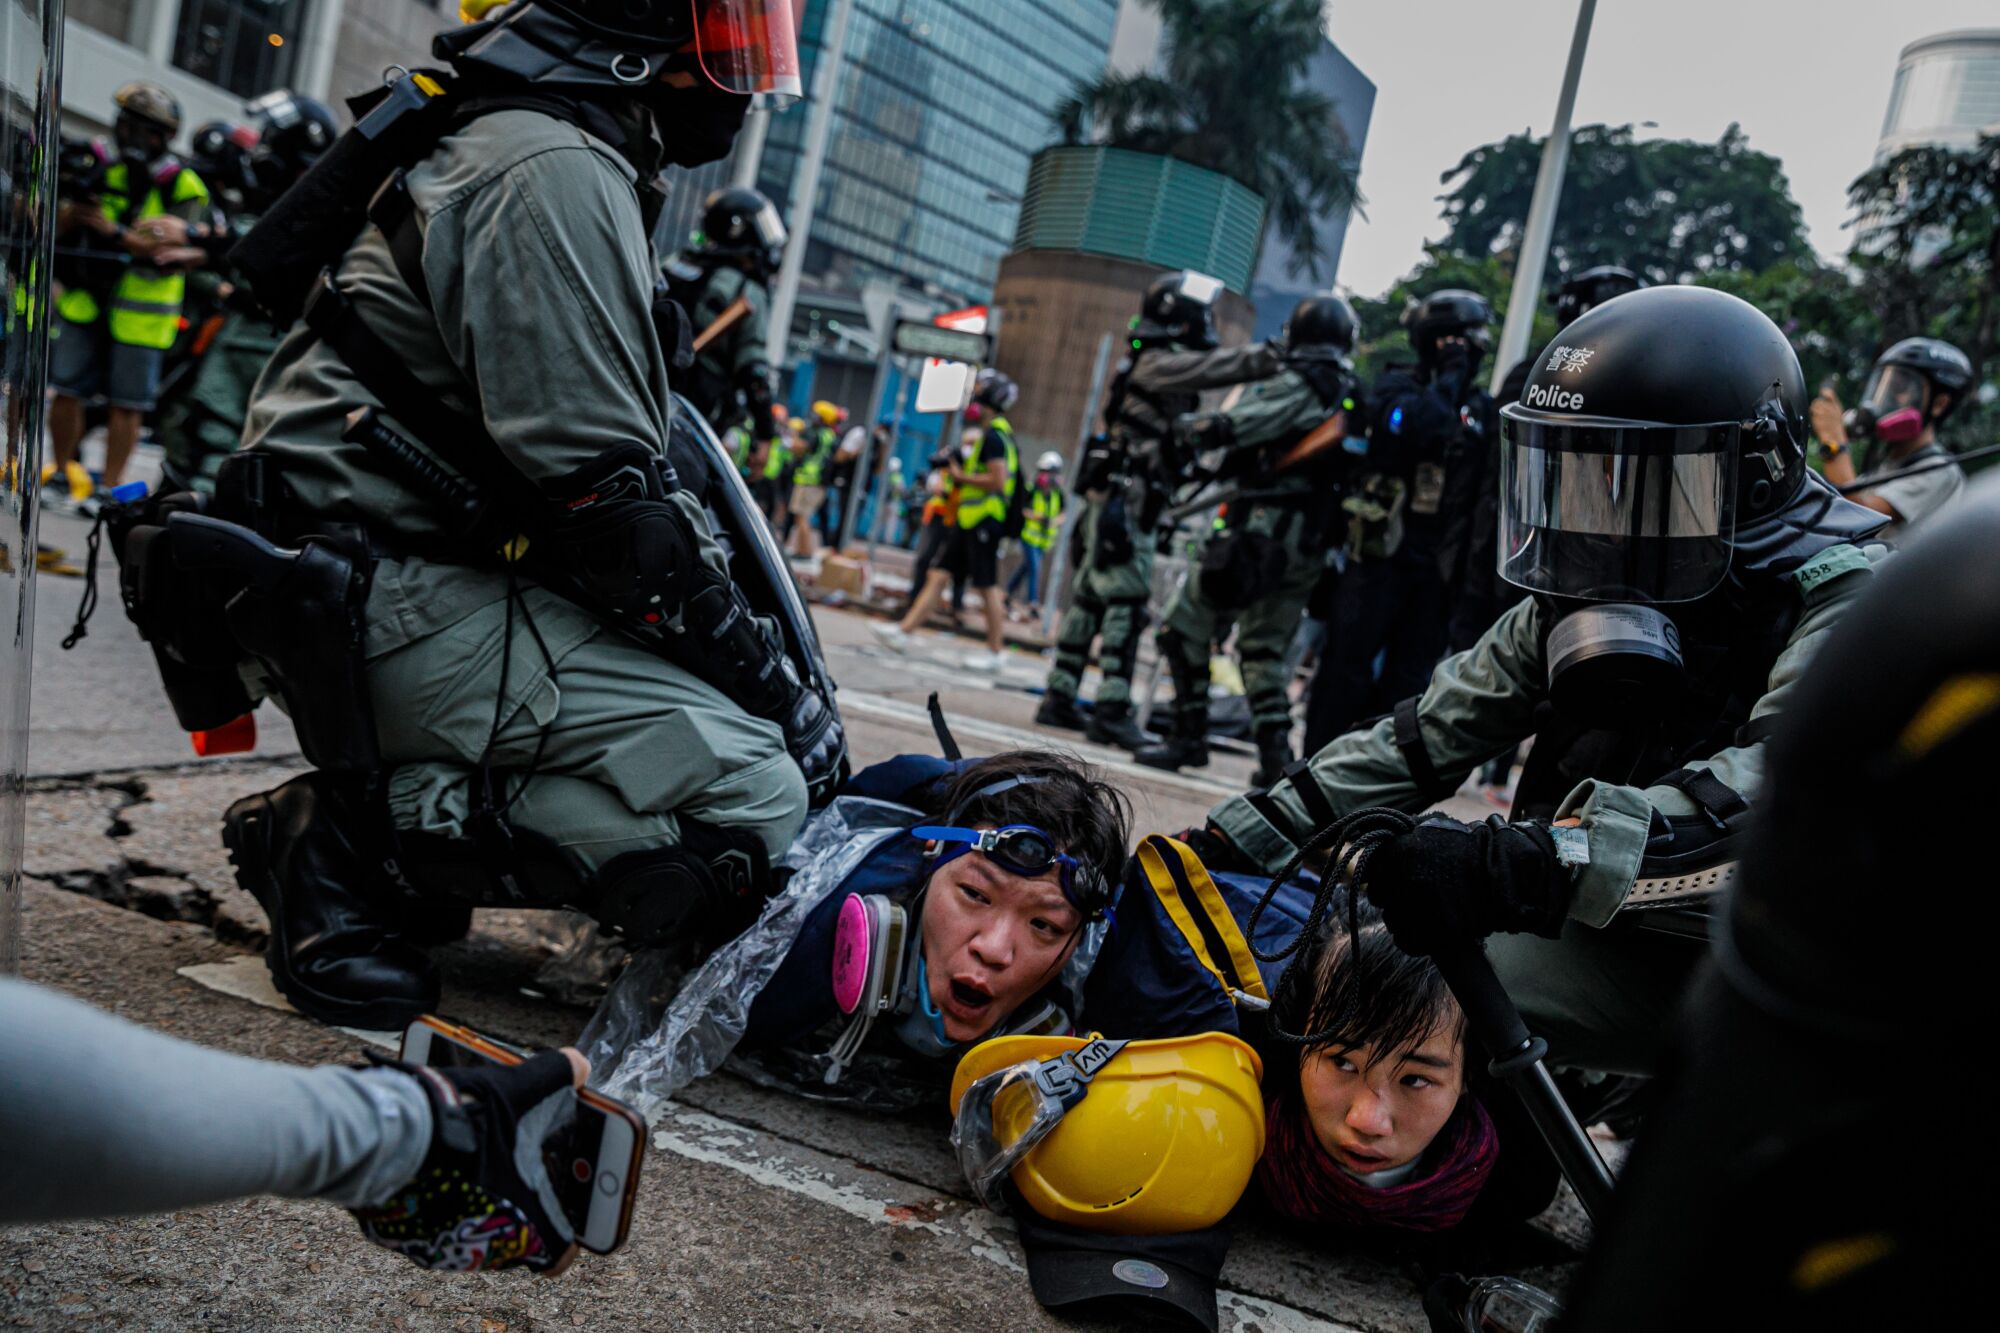 Police officers in riot gear pin down young female protesters on a street in Hong Kong.